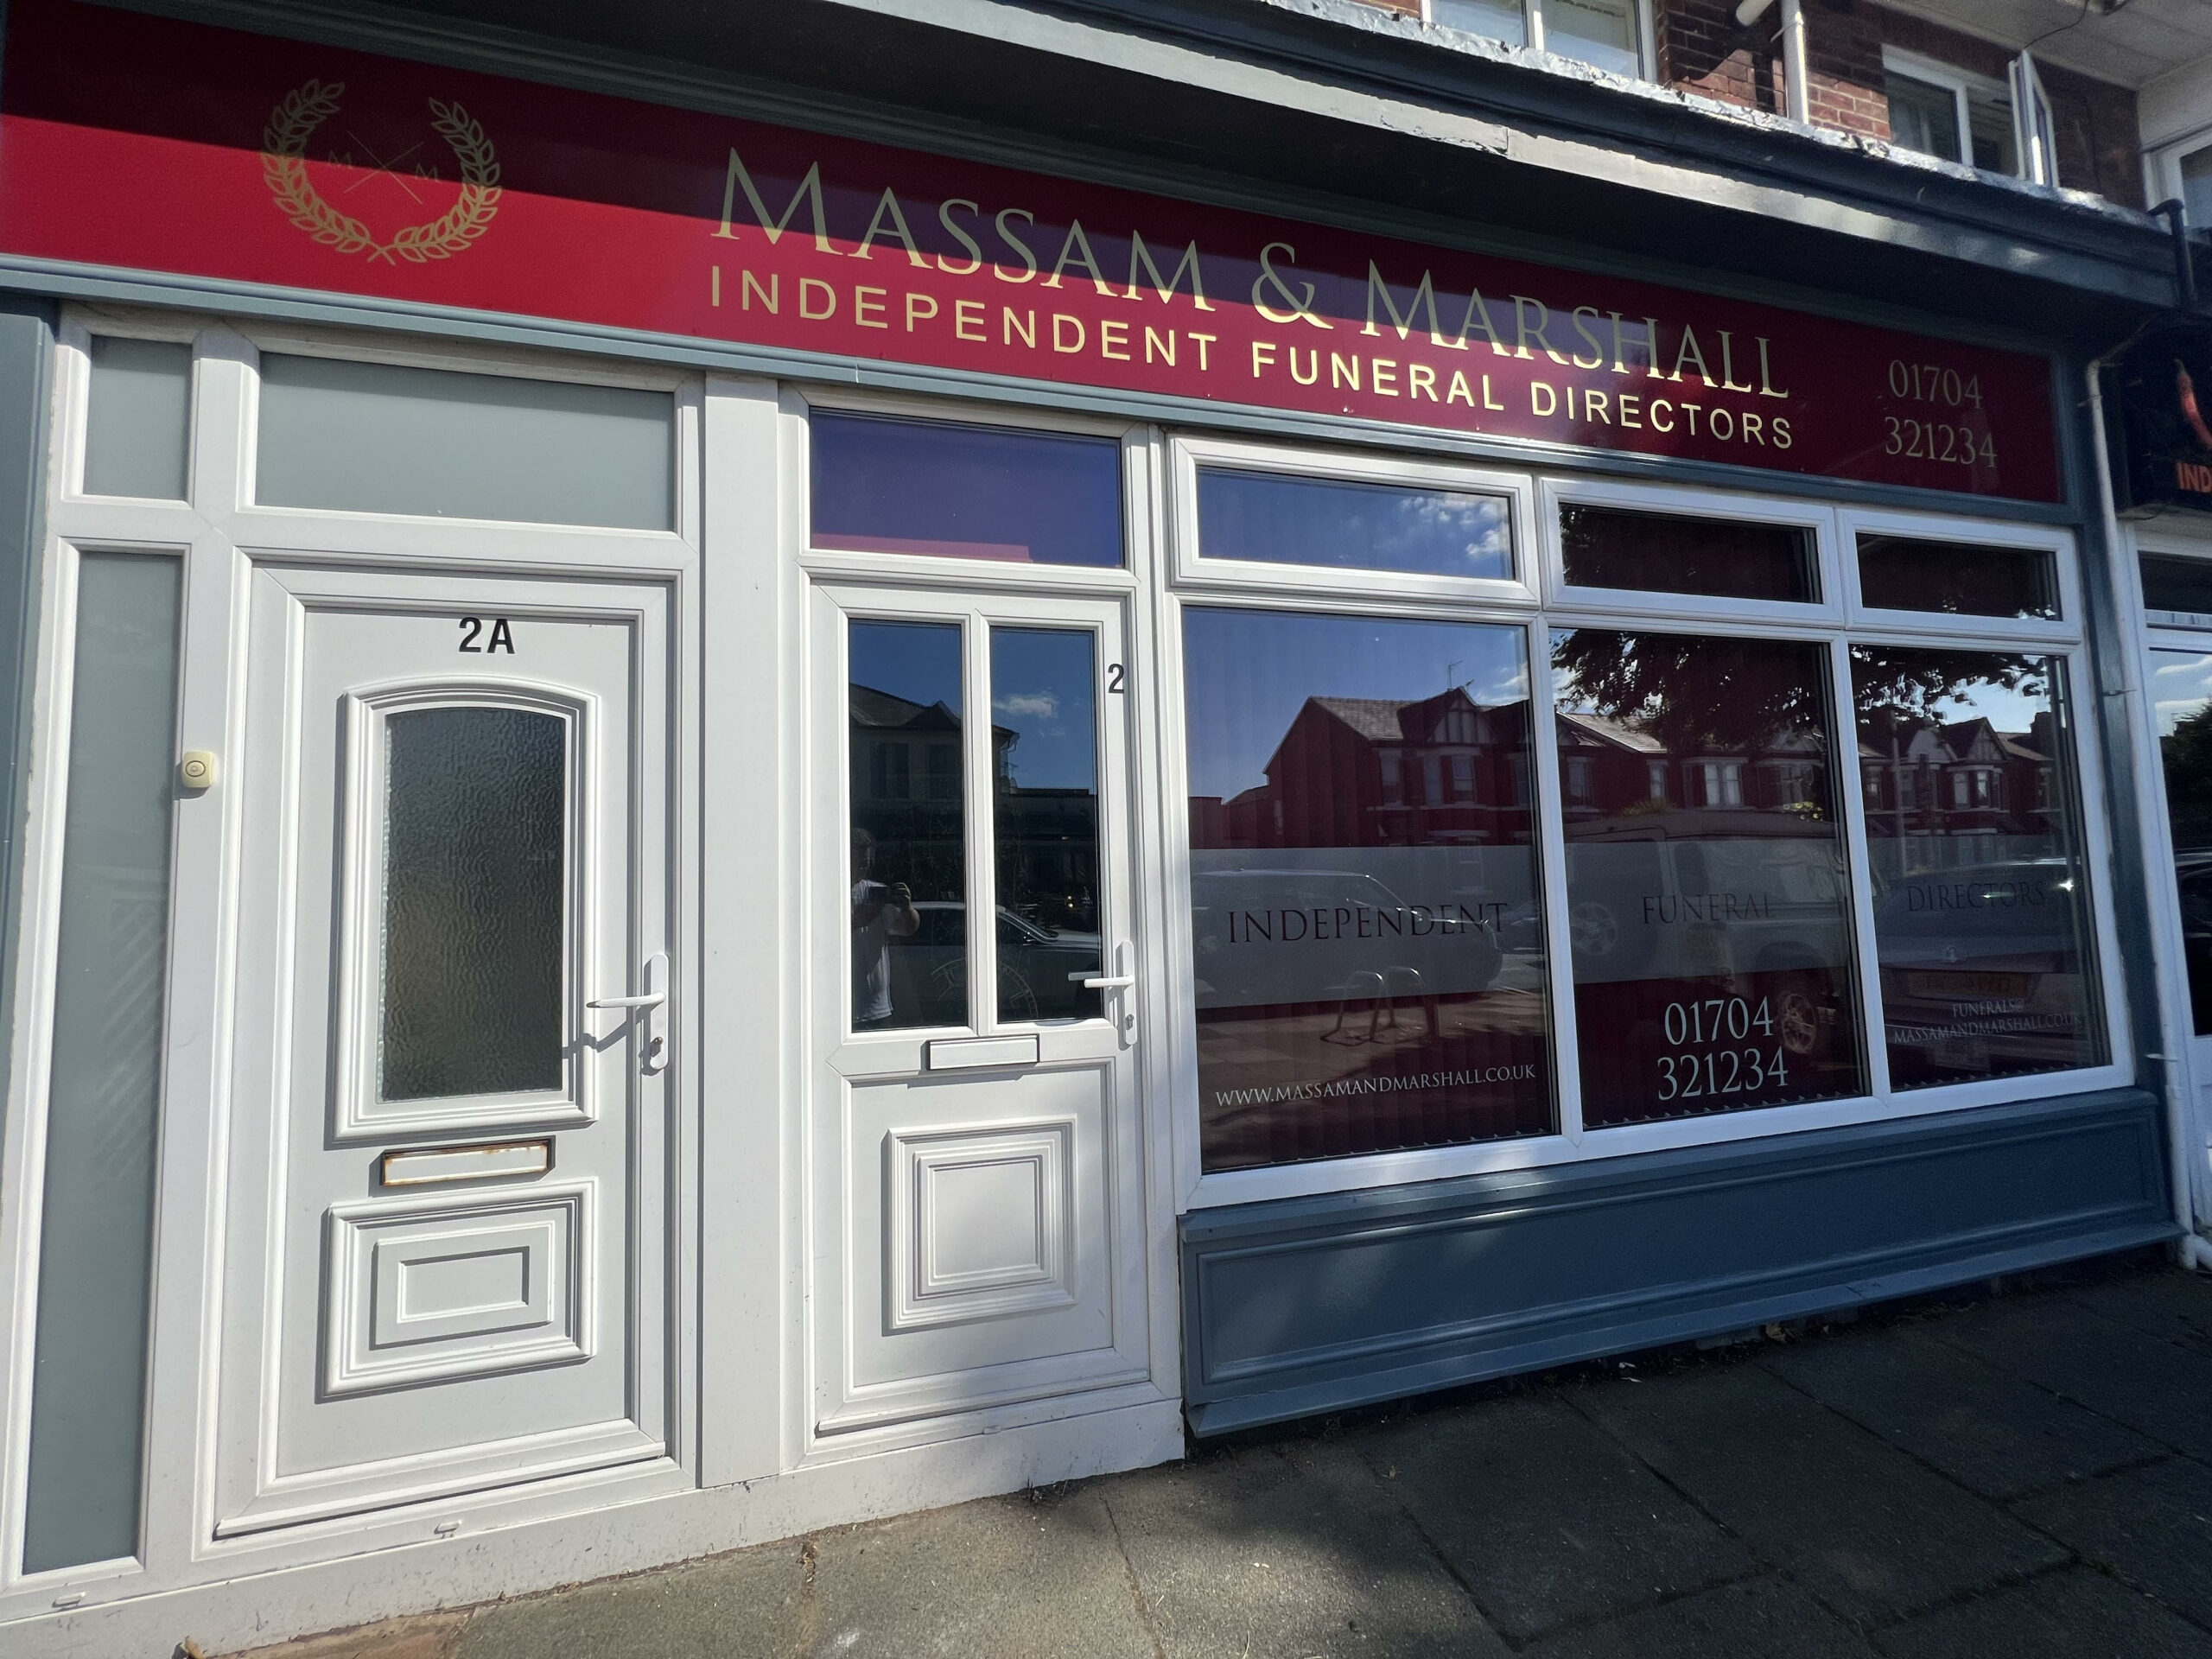 The new Massam and Marshall Independent Funeral Directors branch in Birkdale in Southport